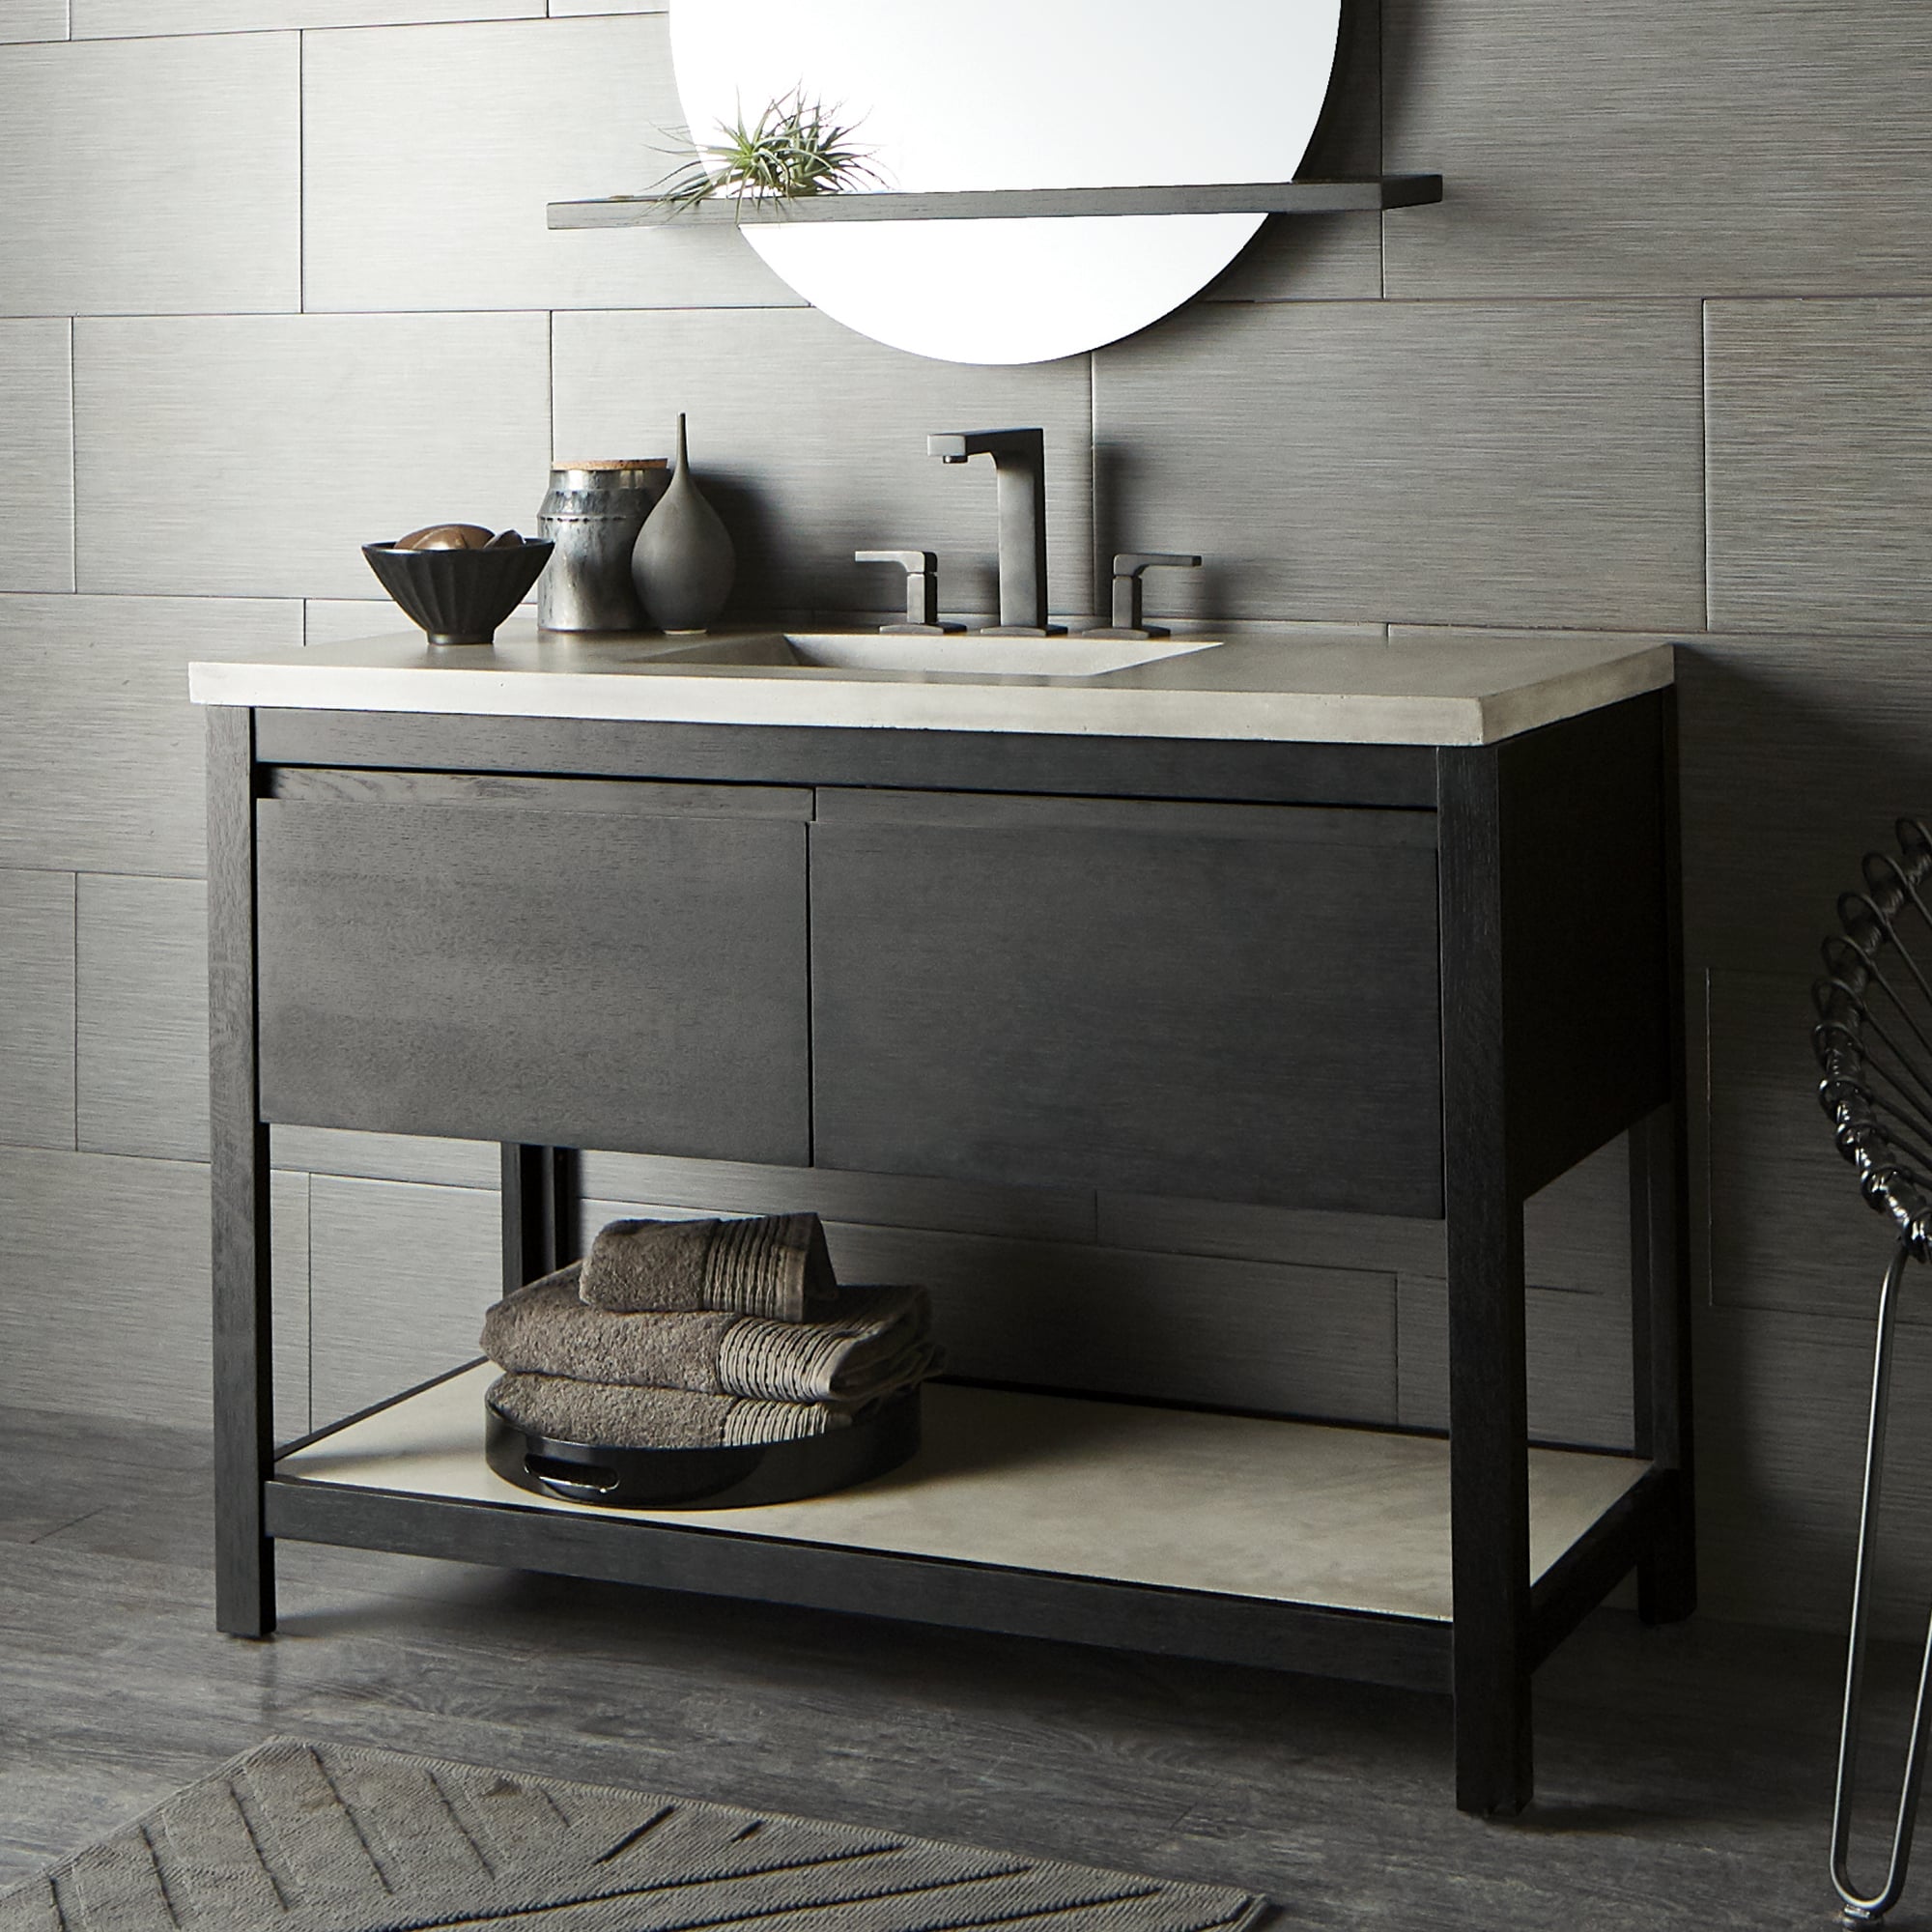 Native Trails 48 in Solace Vanity Midnight Oak with Ash Shelf VNO488-A